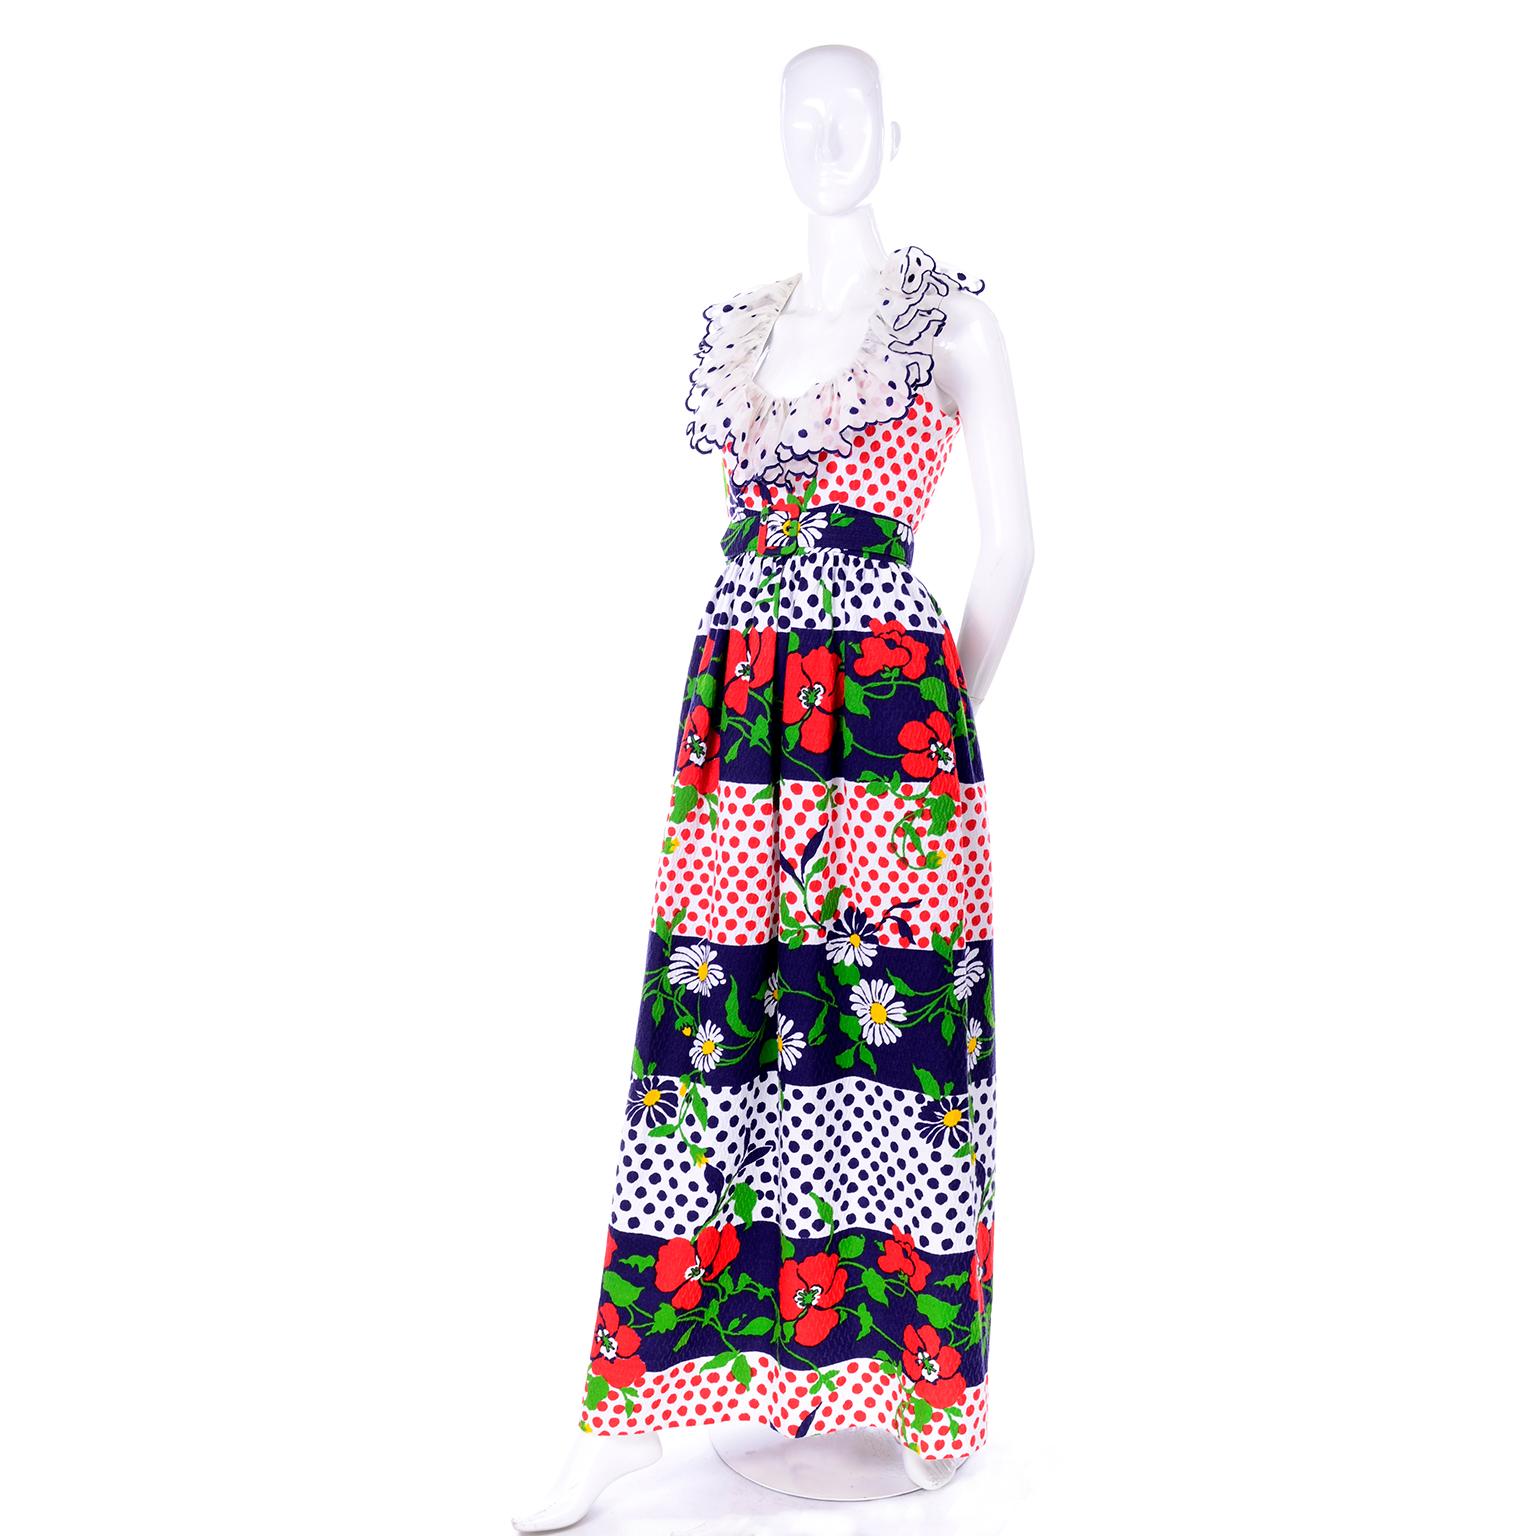 This is the perfect summer dress by Oscar de la Renta from the late 1960's! It is a sleeveless maxi dress with dramatic sheer ruffles around the collar with blue embroidered polka dots. The dress is made of a textured cotton with bands of red, white